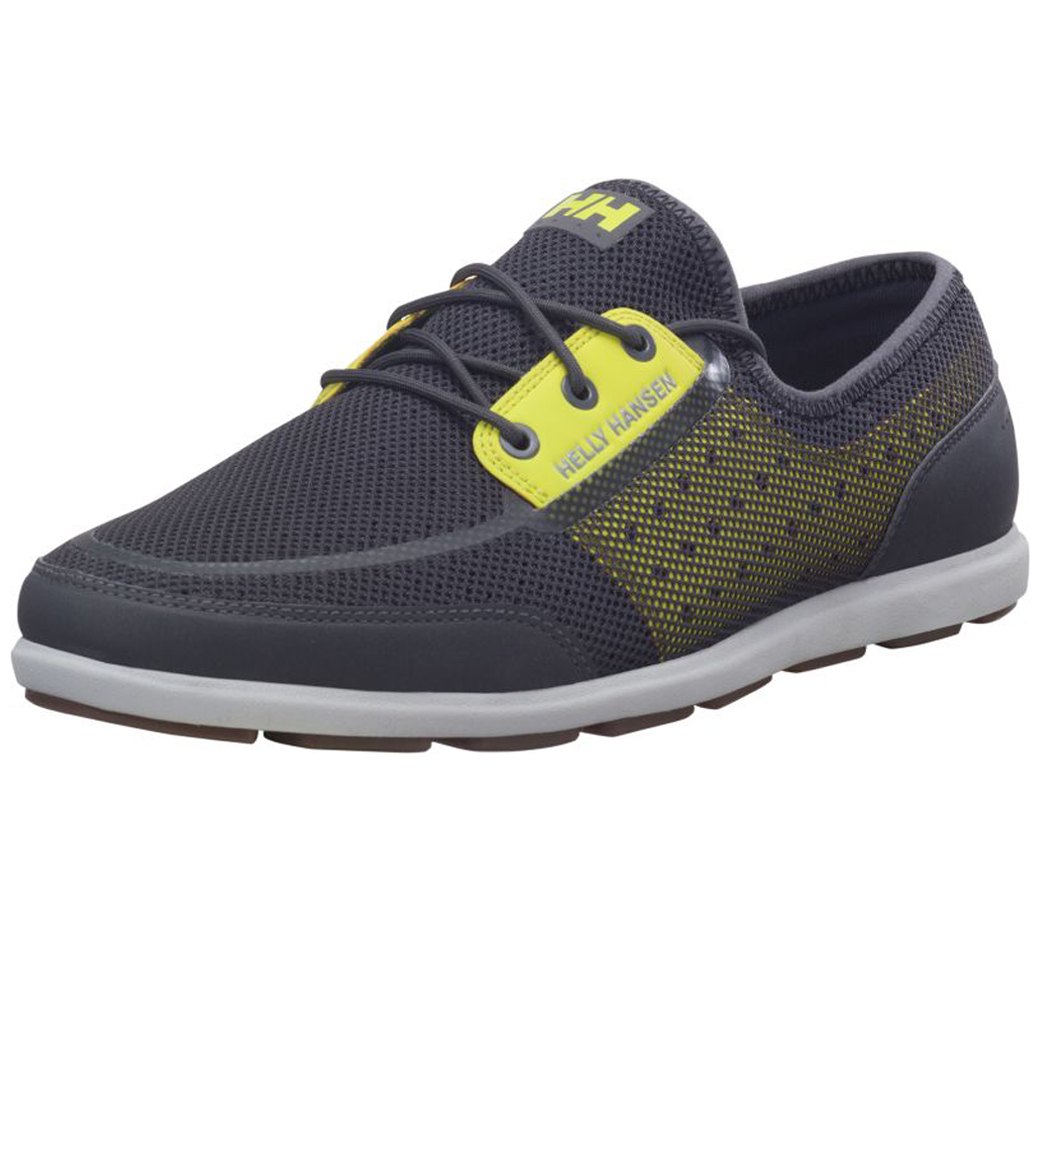 Helly Hansen Men's Trysail Water Shoes - Ebony/Wasabi 7 - Swimoutlet.com